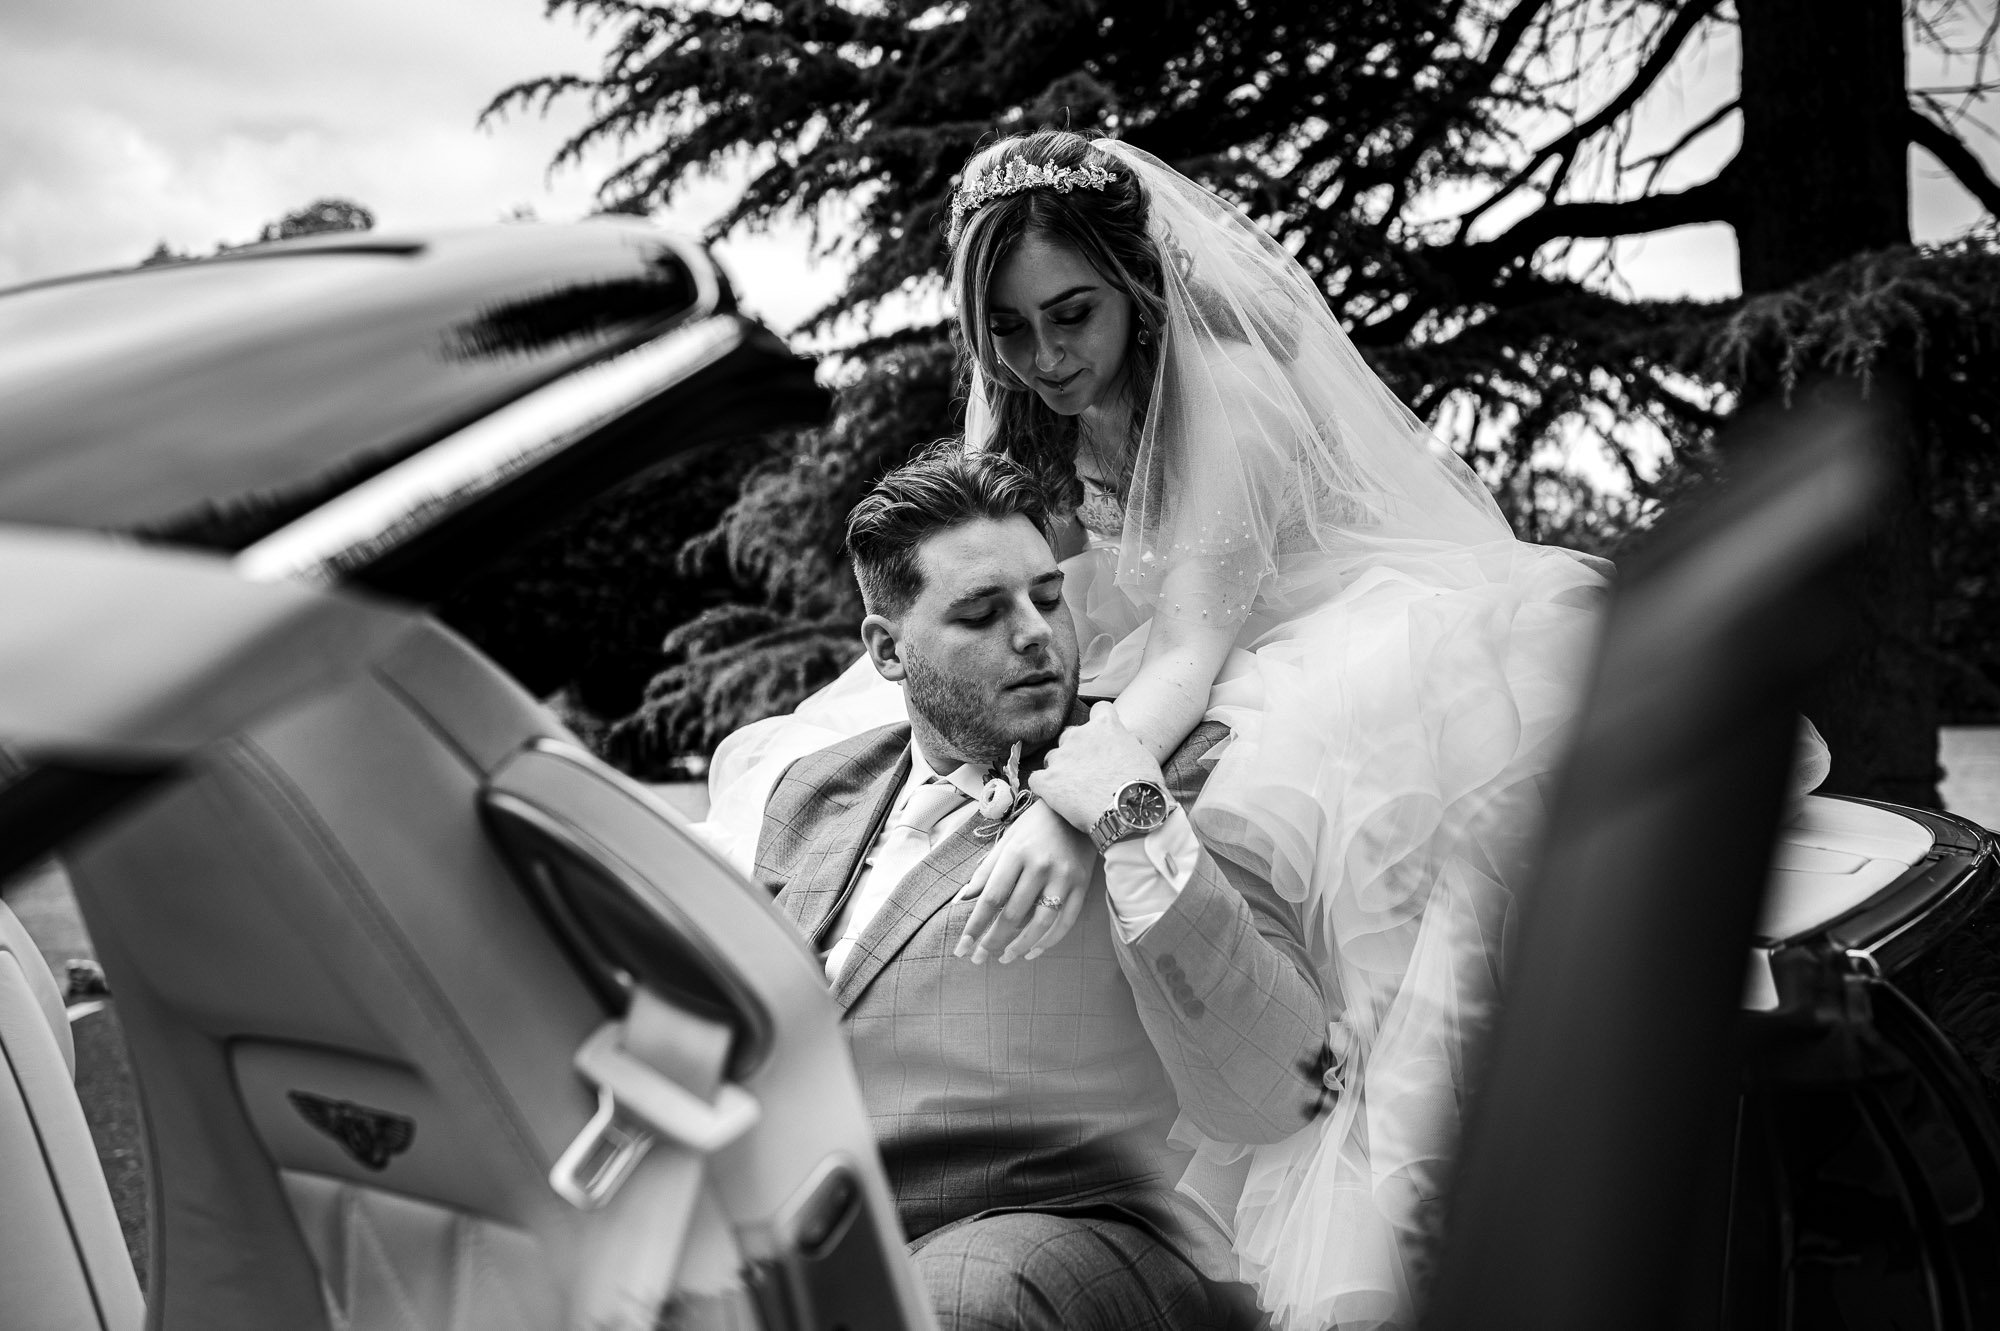 Bride and groom in the bridal car